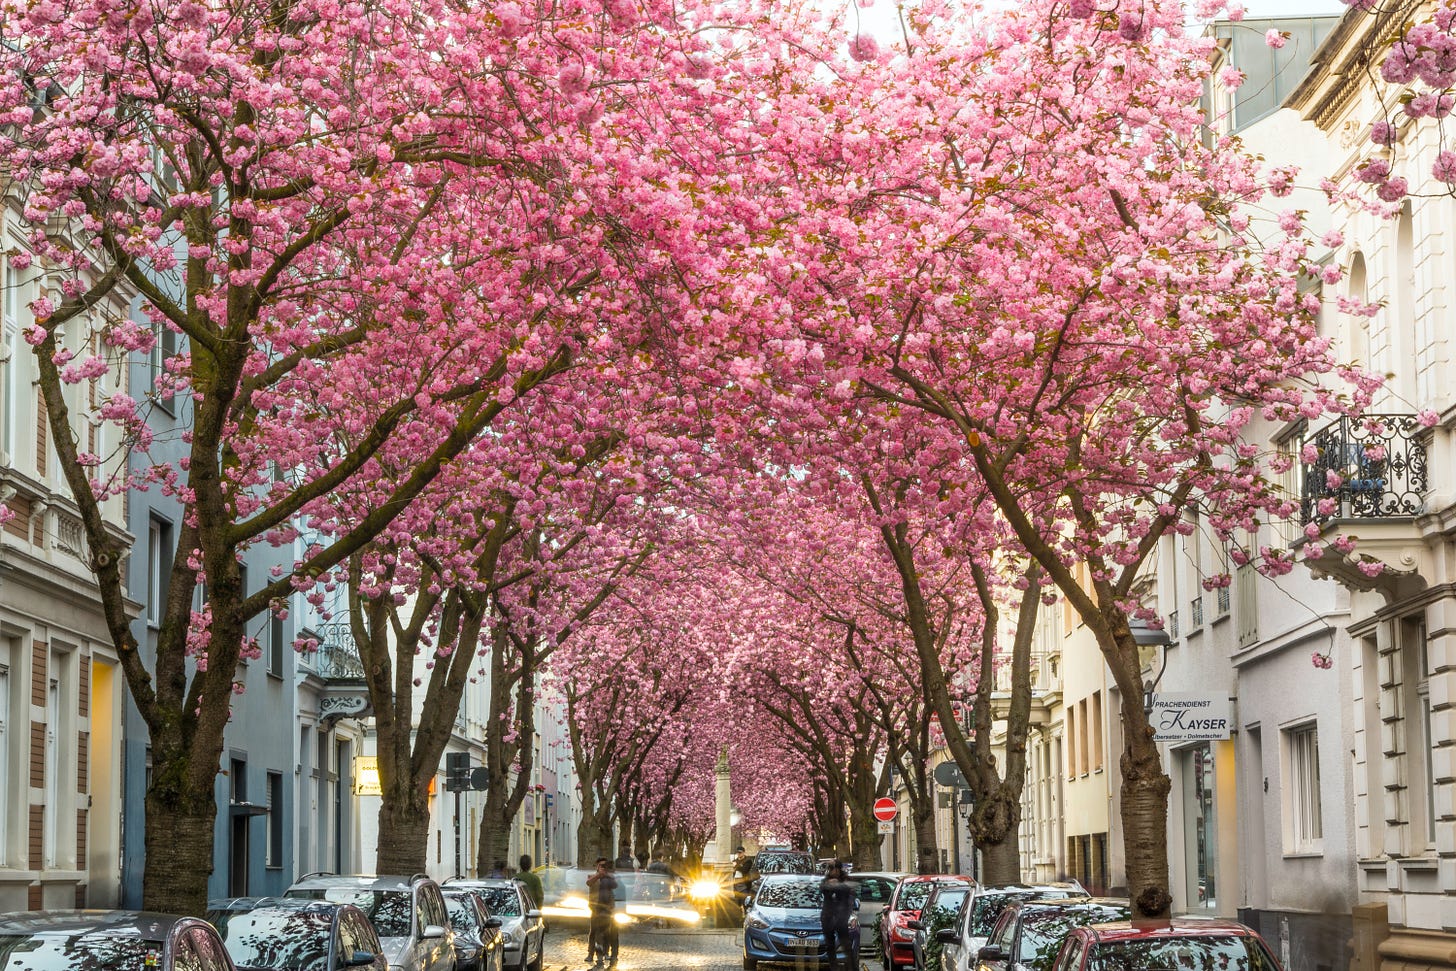 A residential street with beautiful cherry trees covered in bright pink blossom.